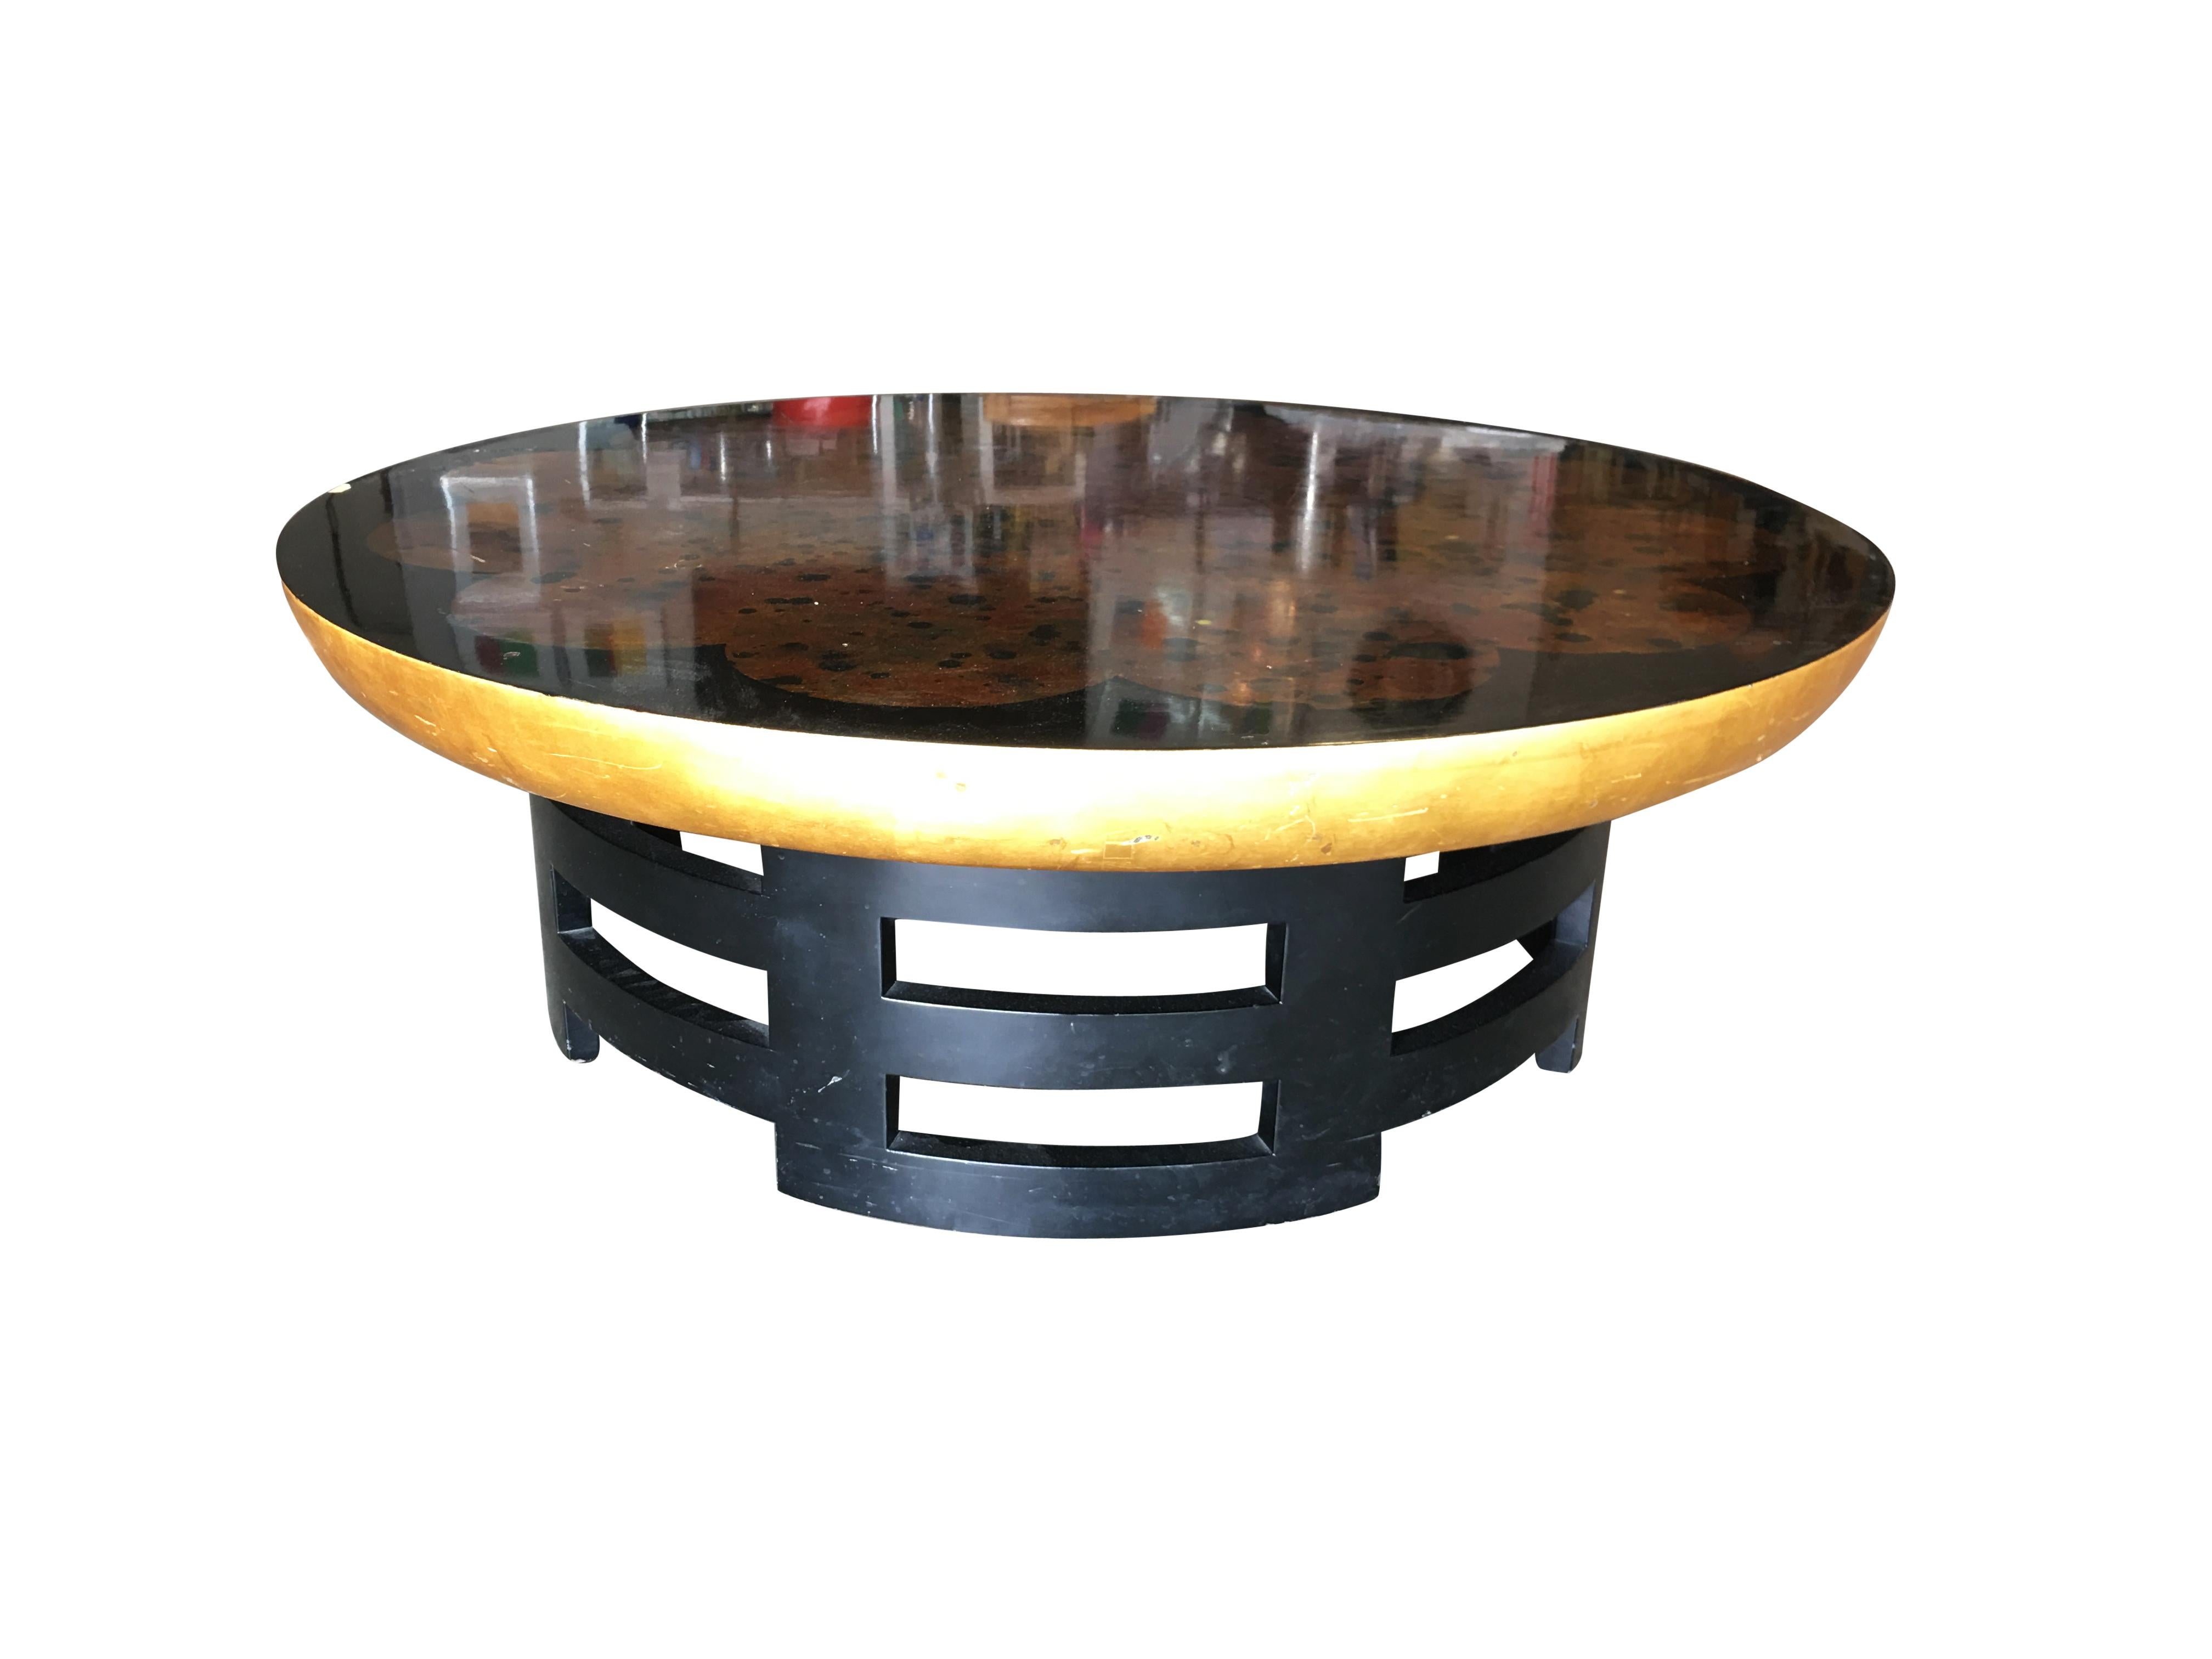 Asian inspired coffee table with black sculpted base and black lacquer top by Muller and Barringer for Kittinger in the 1950's.